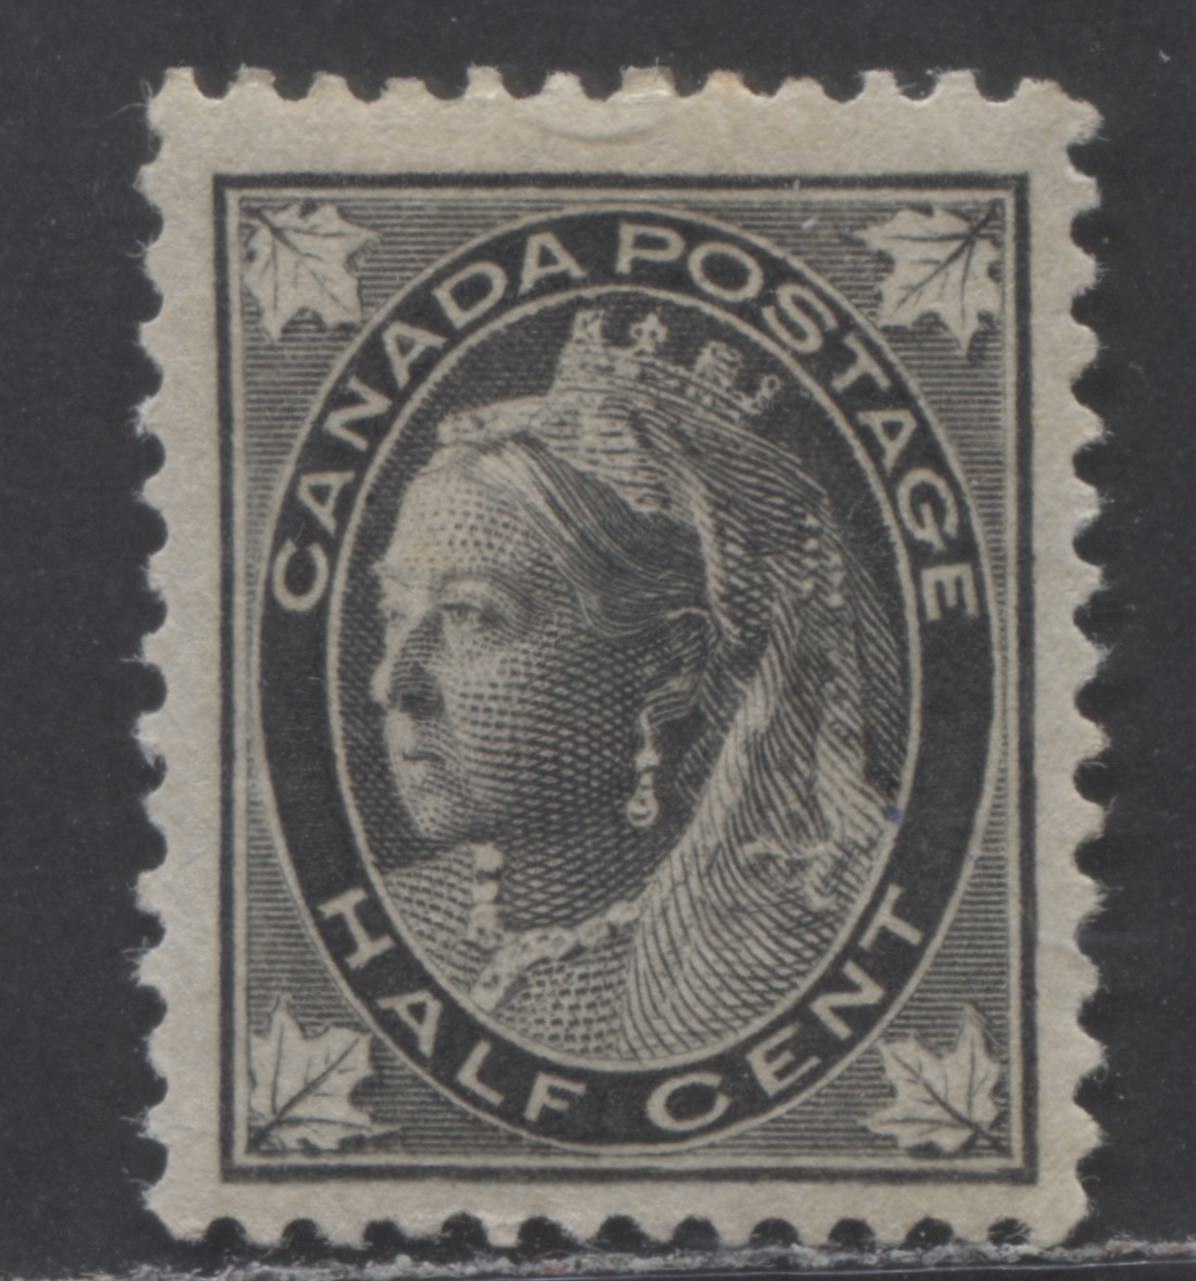 Lot 69 Canada #66 1/2c Black Queen Victoria, 1897-1898 Maple Leaf Issue, A VFOG Single On Vertical Wove Paper, Minor Re-entry